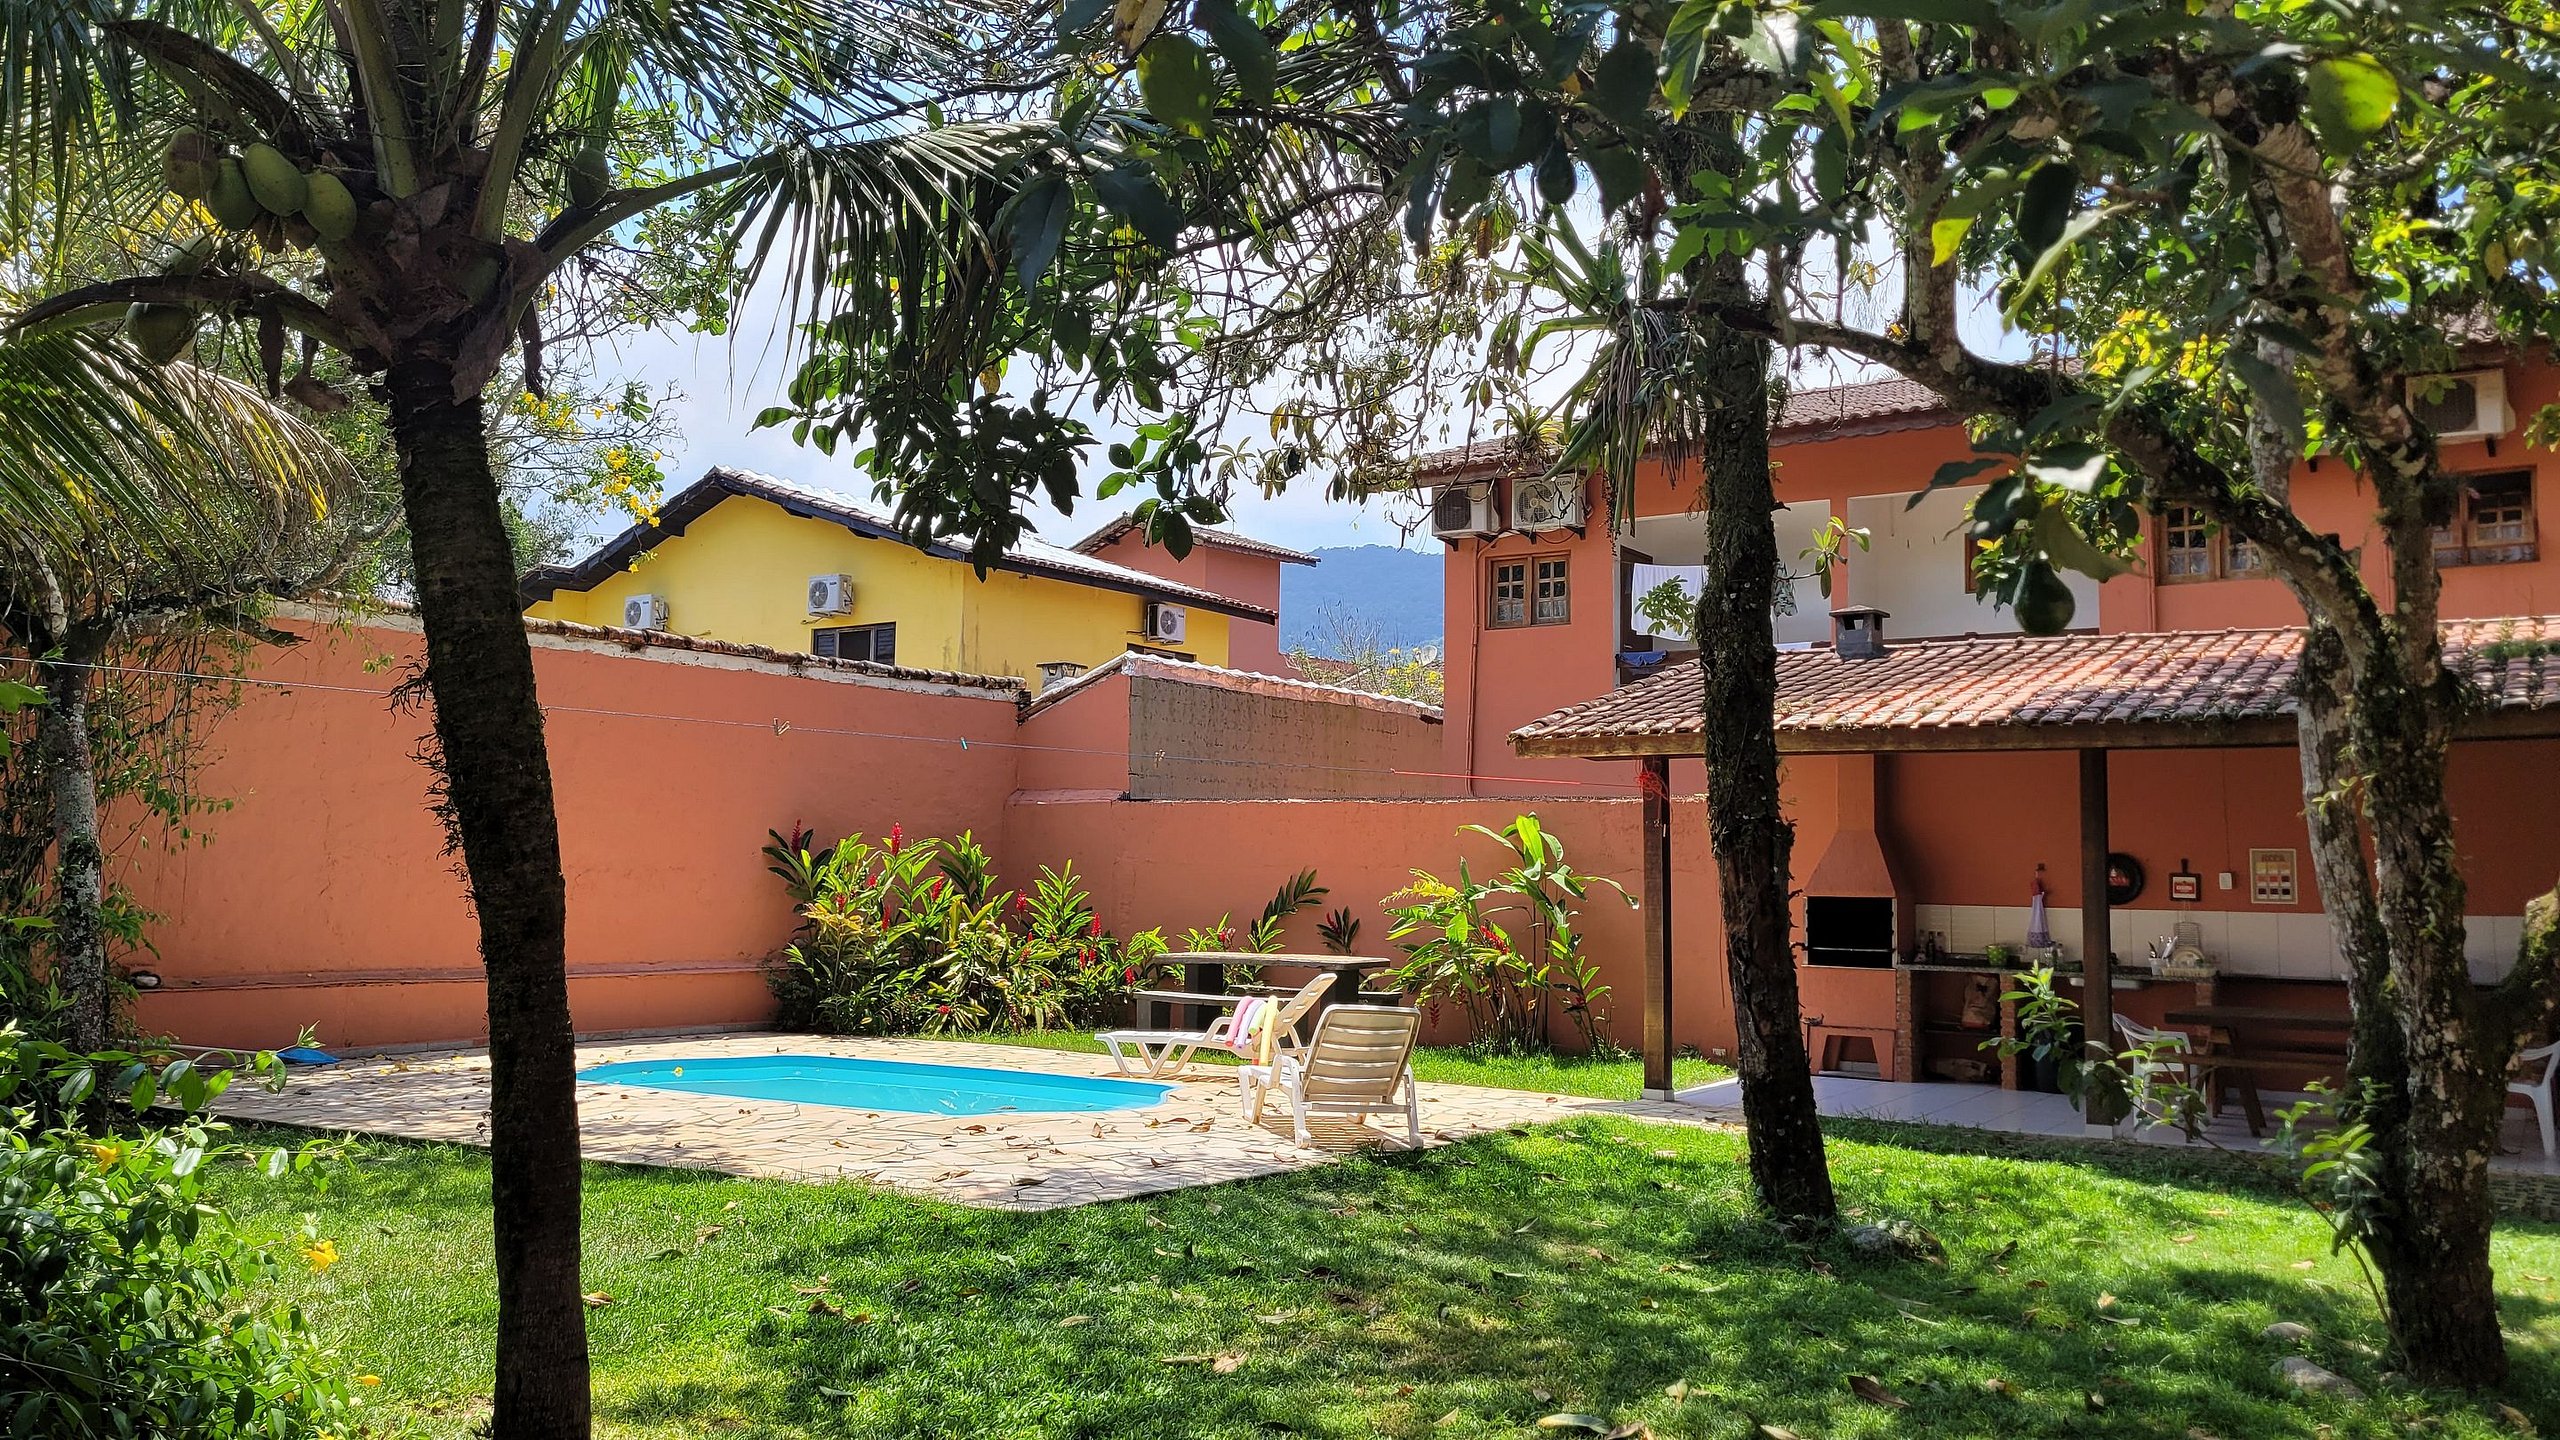 Property Image 1 - Itaberaba Master Ville - Large residence with pool, barbecue and close to the beach in Boicucanga